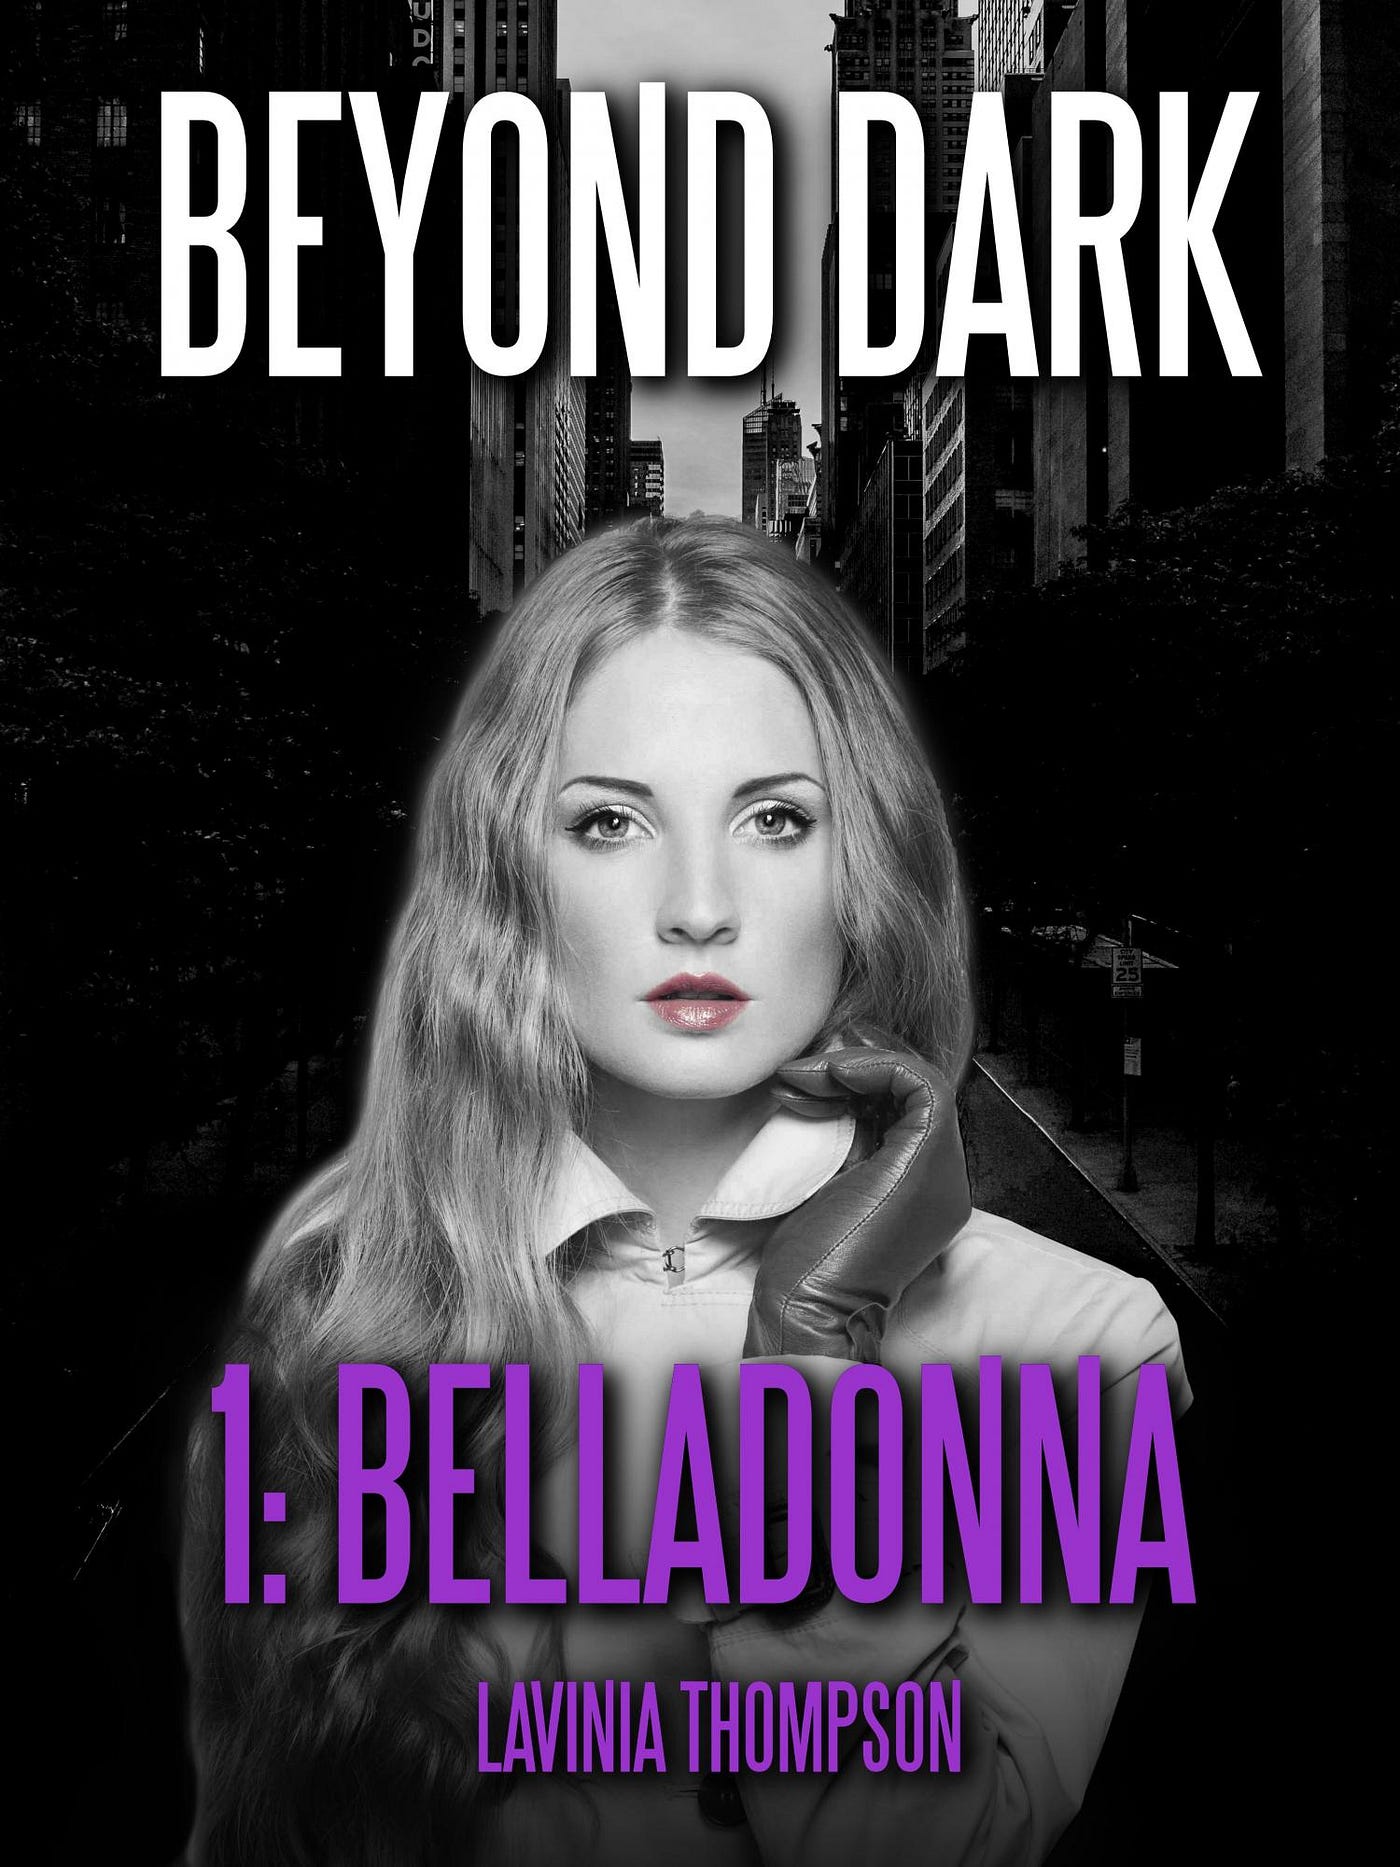 Excerpts from my book, “Beyond Dark” by Lavinia Thompson Medium